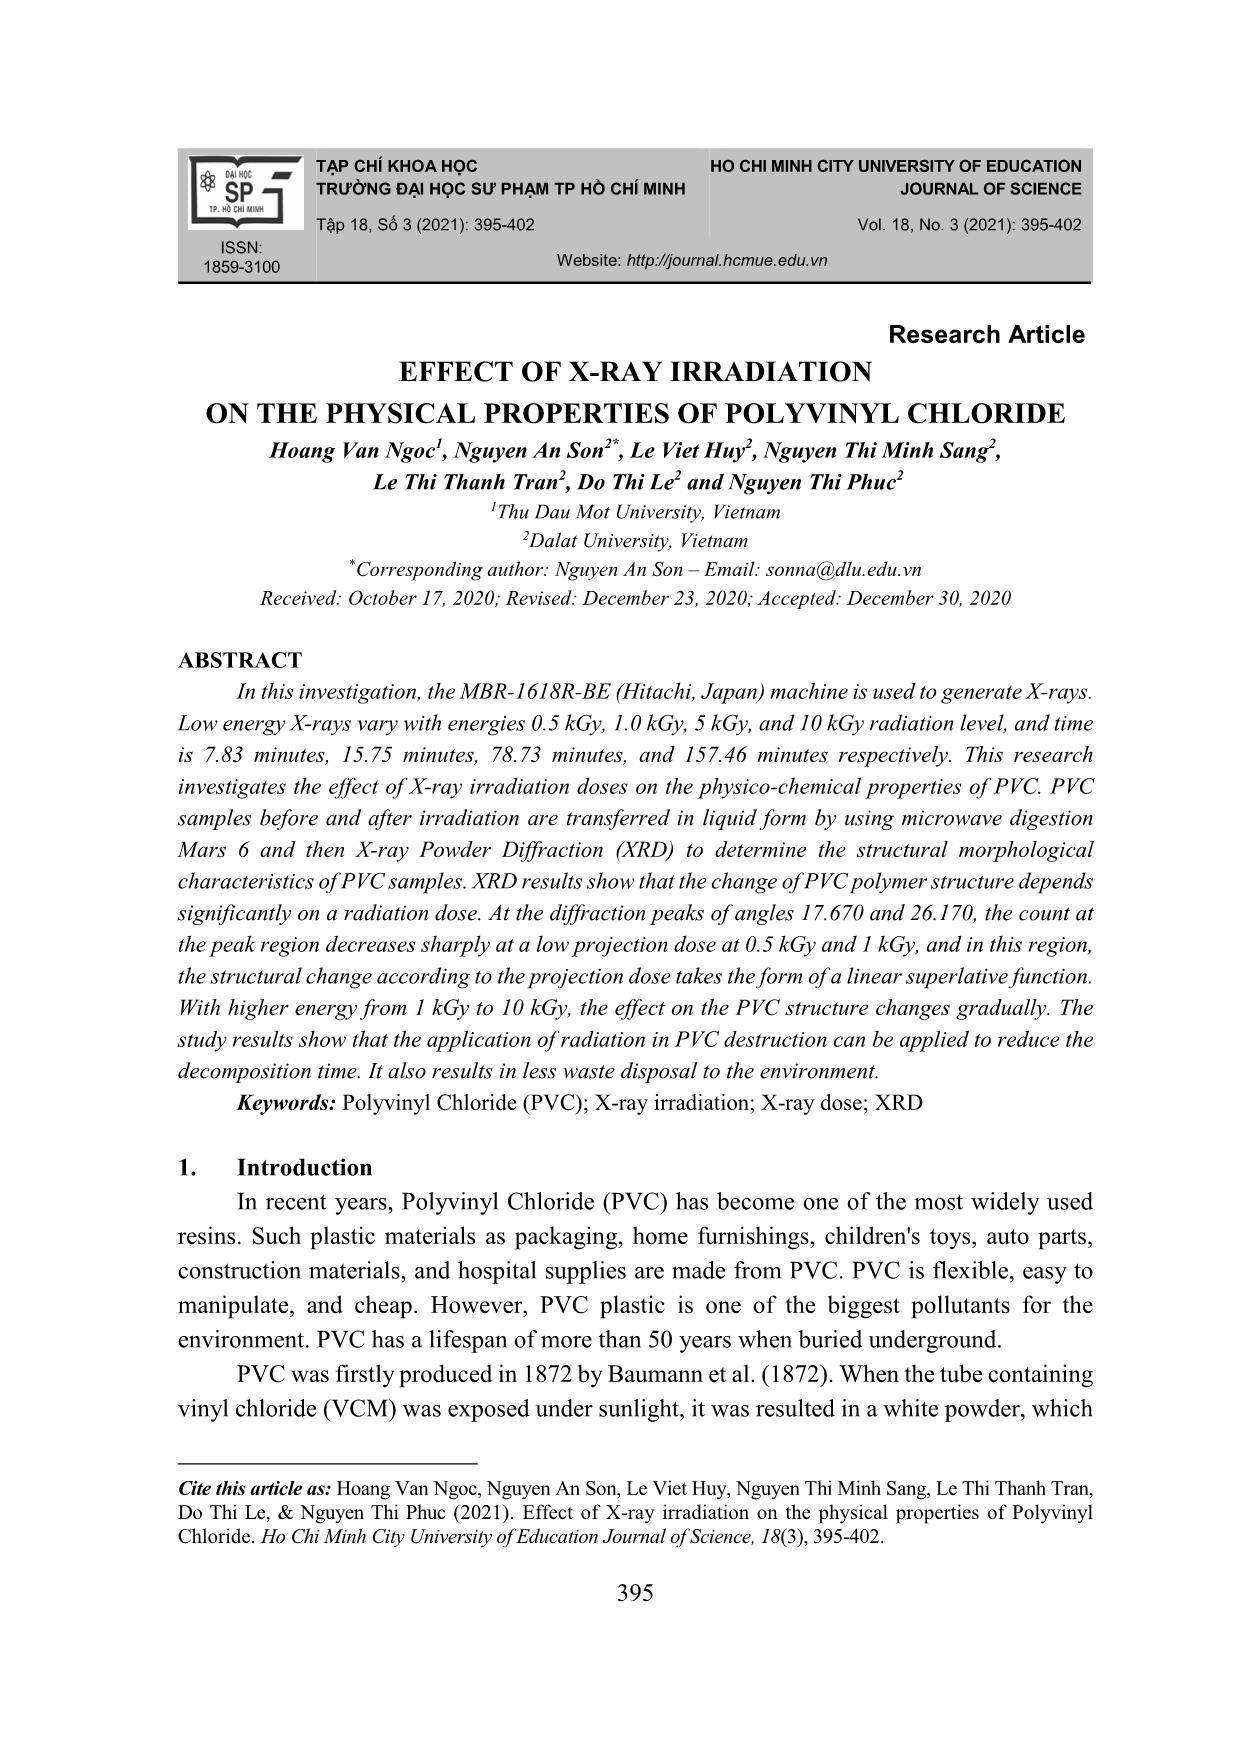 Effect of x-ray irradiation on the physical properties of polyvinyl chloride trang 1